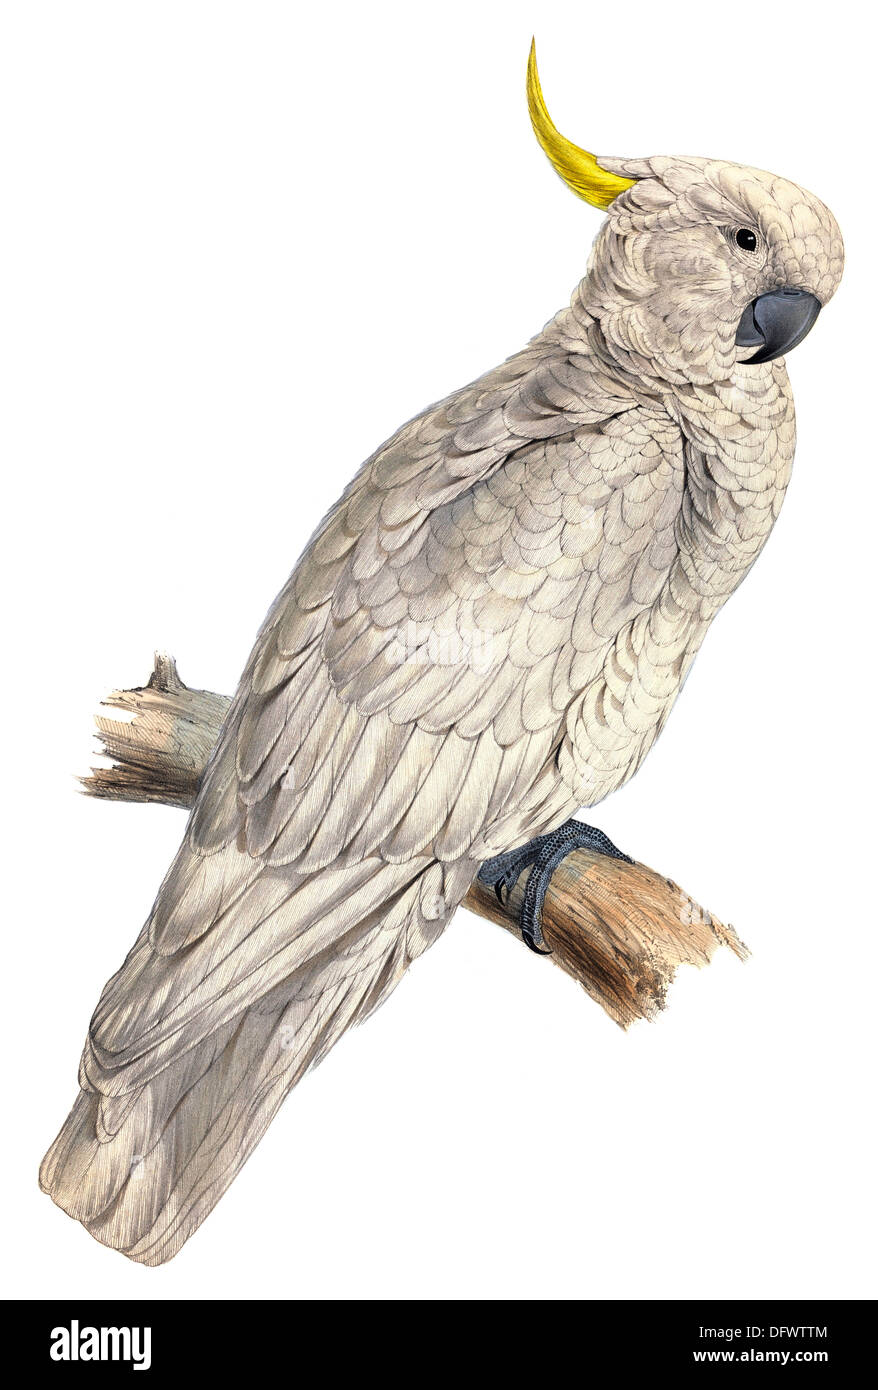 Plyctolophus Galeritus Greater Sulphur crested Cockatoo lithograph Stock Photo